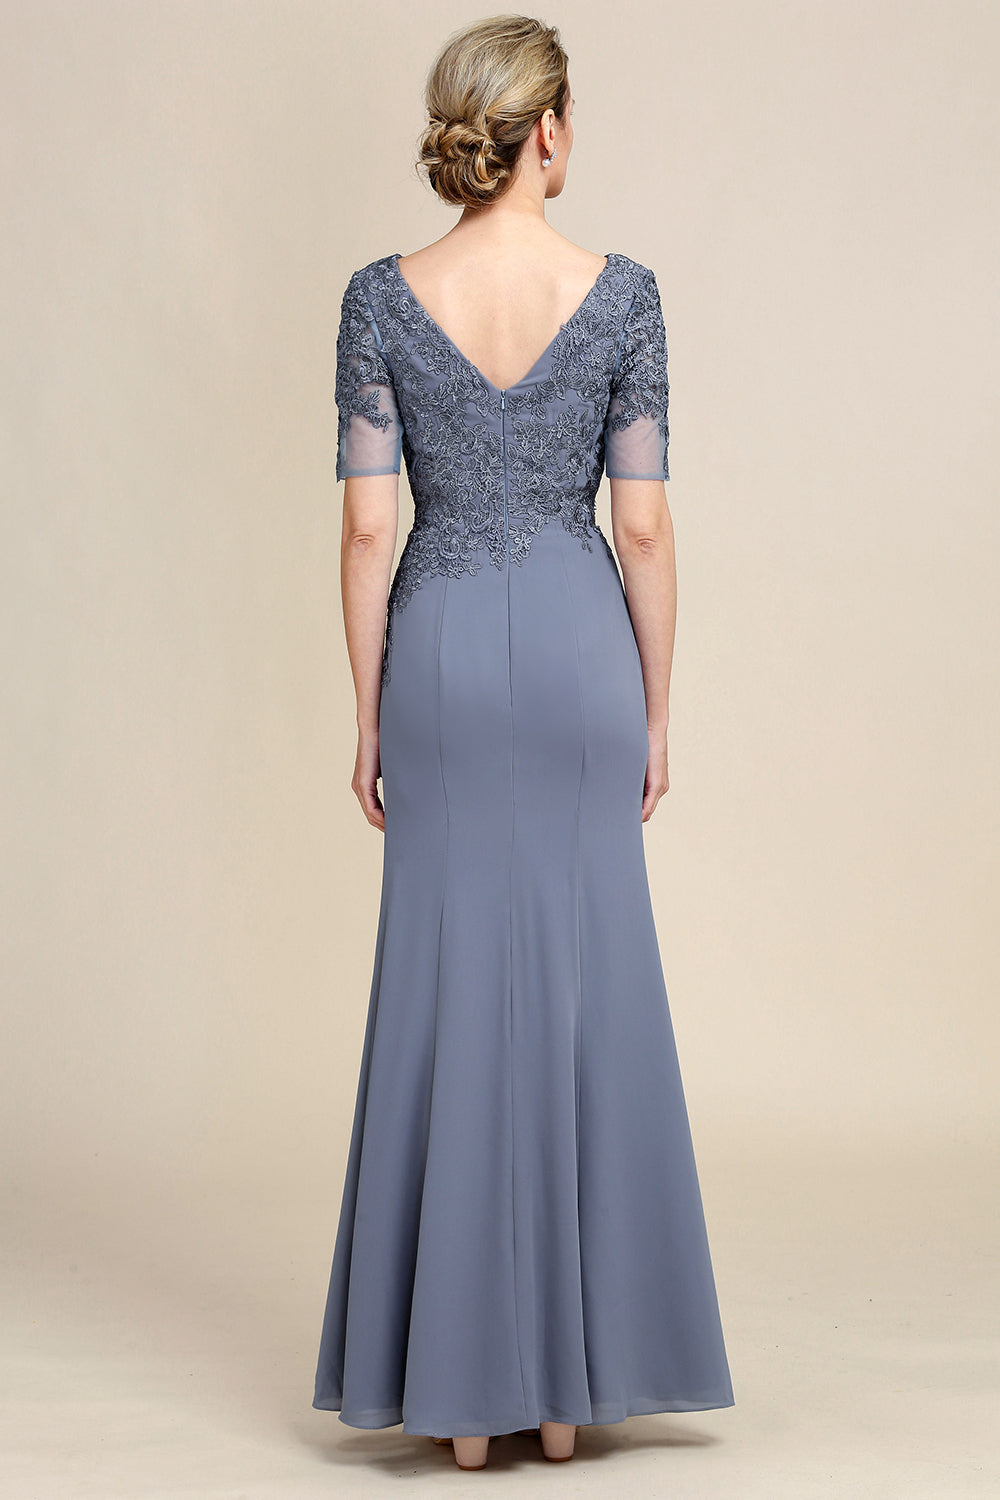 Grey Blue Mermaid Floor Length Chiffon Mother of Bride Dress With Appliques